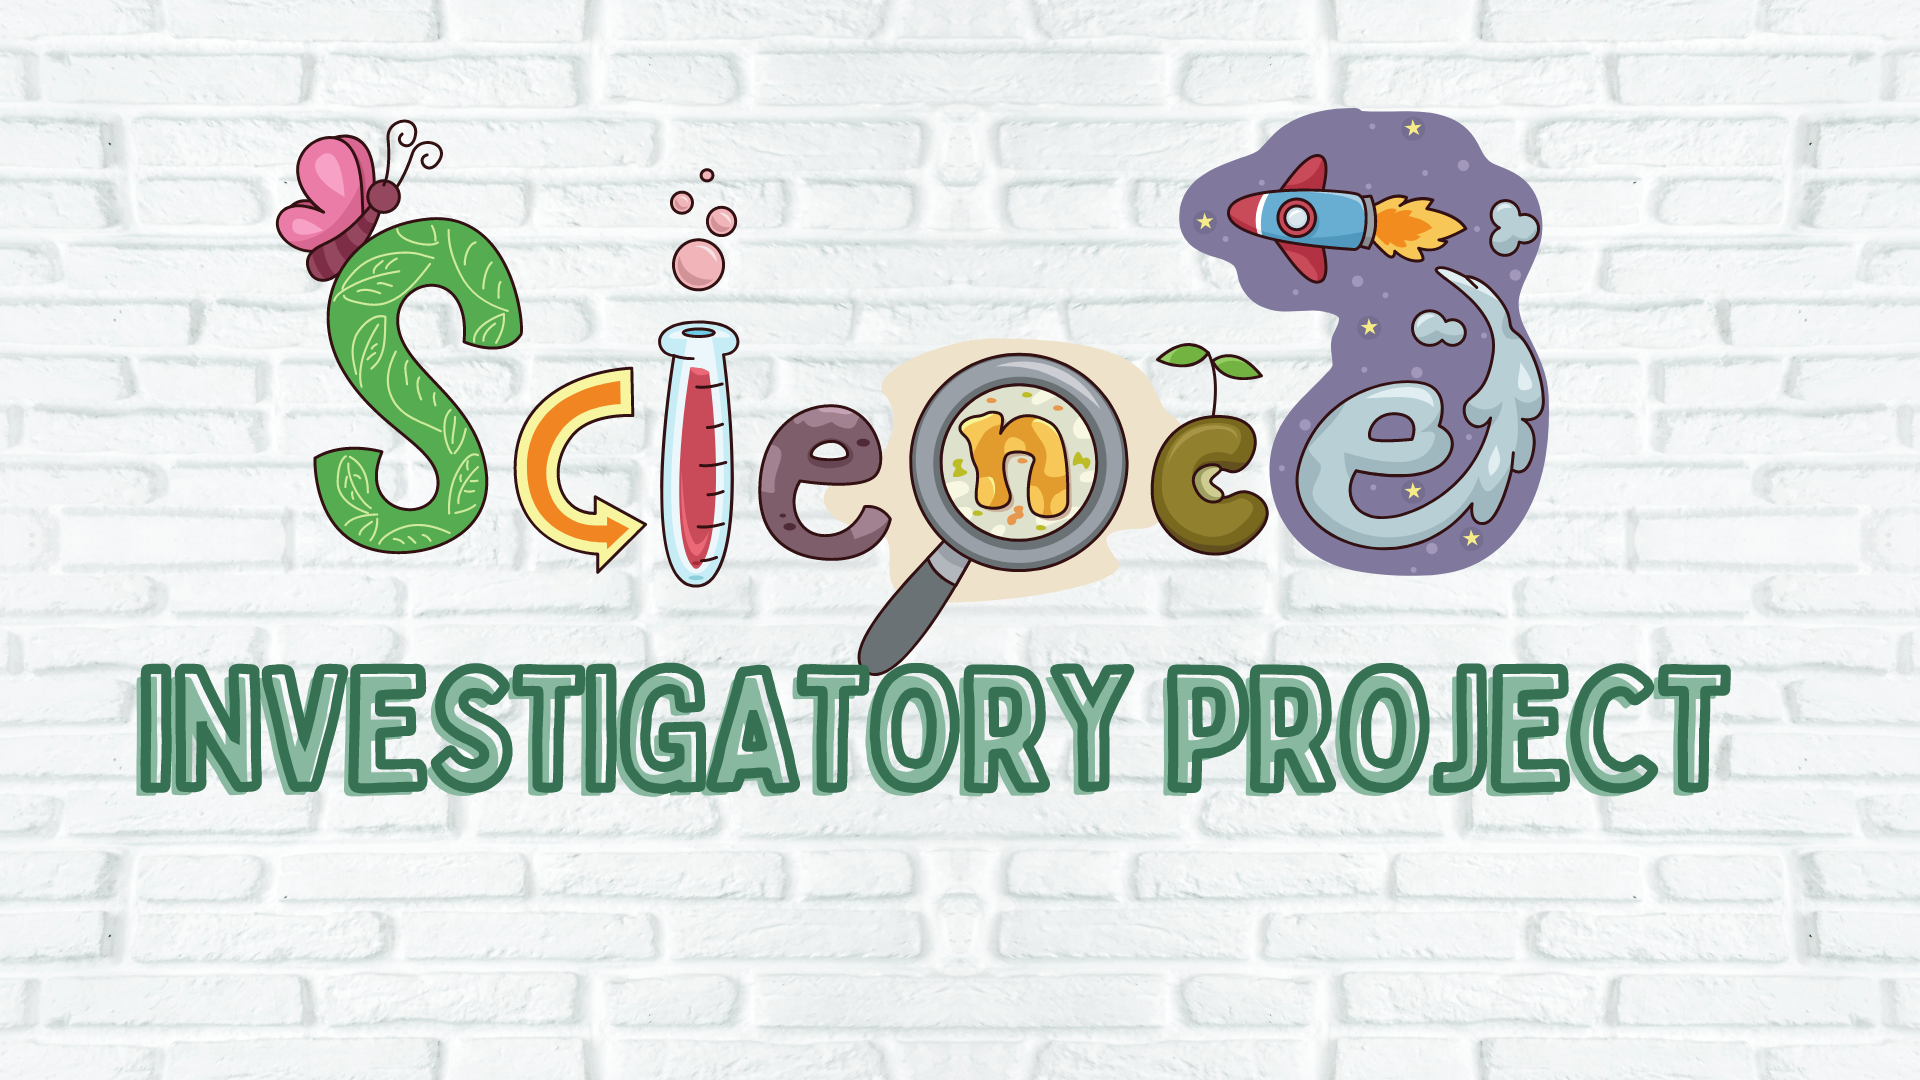 SCIENCE INVESTIGATORY PROJECT